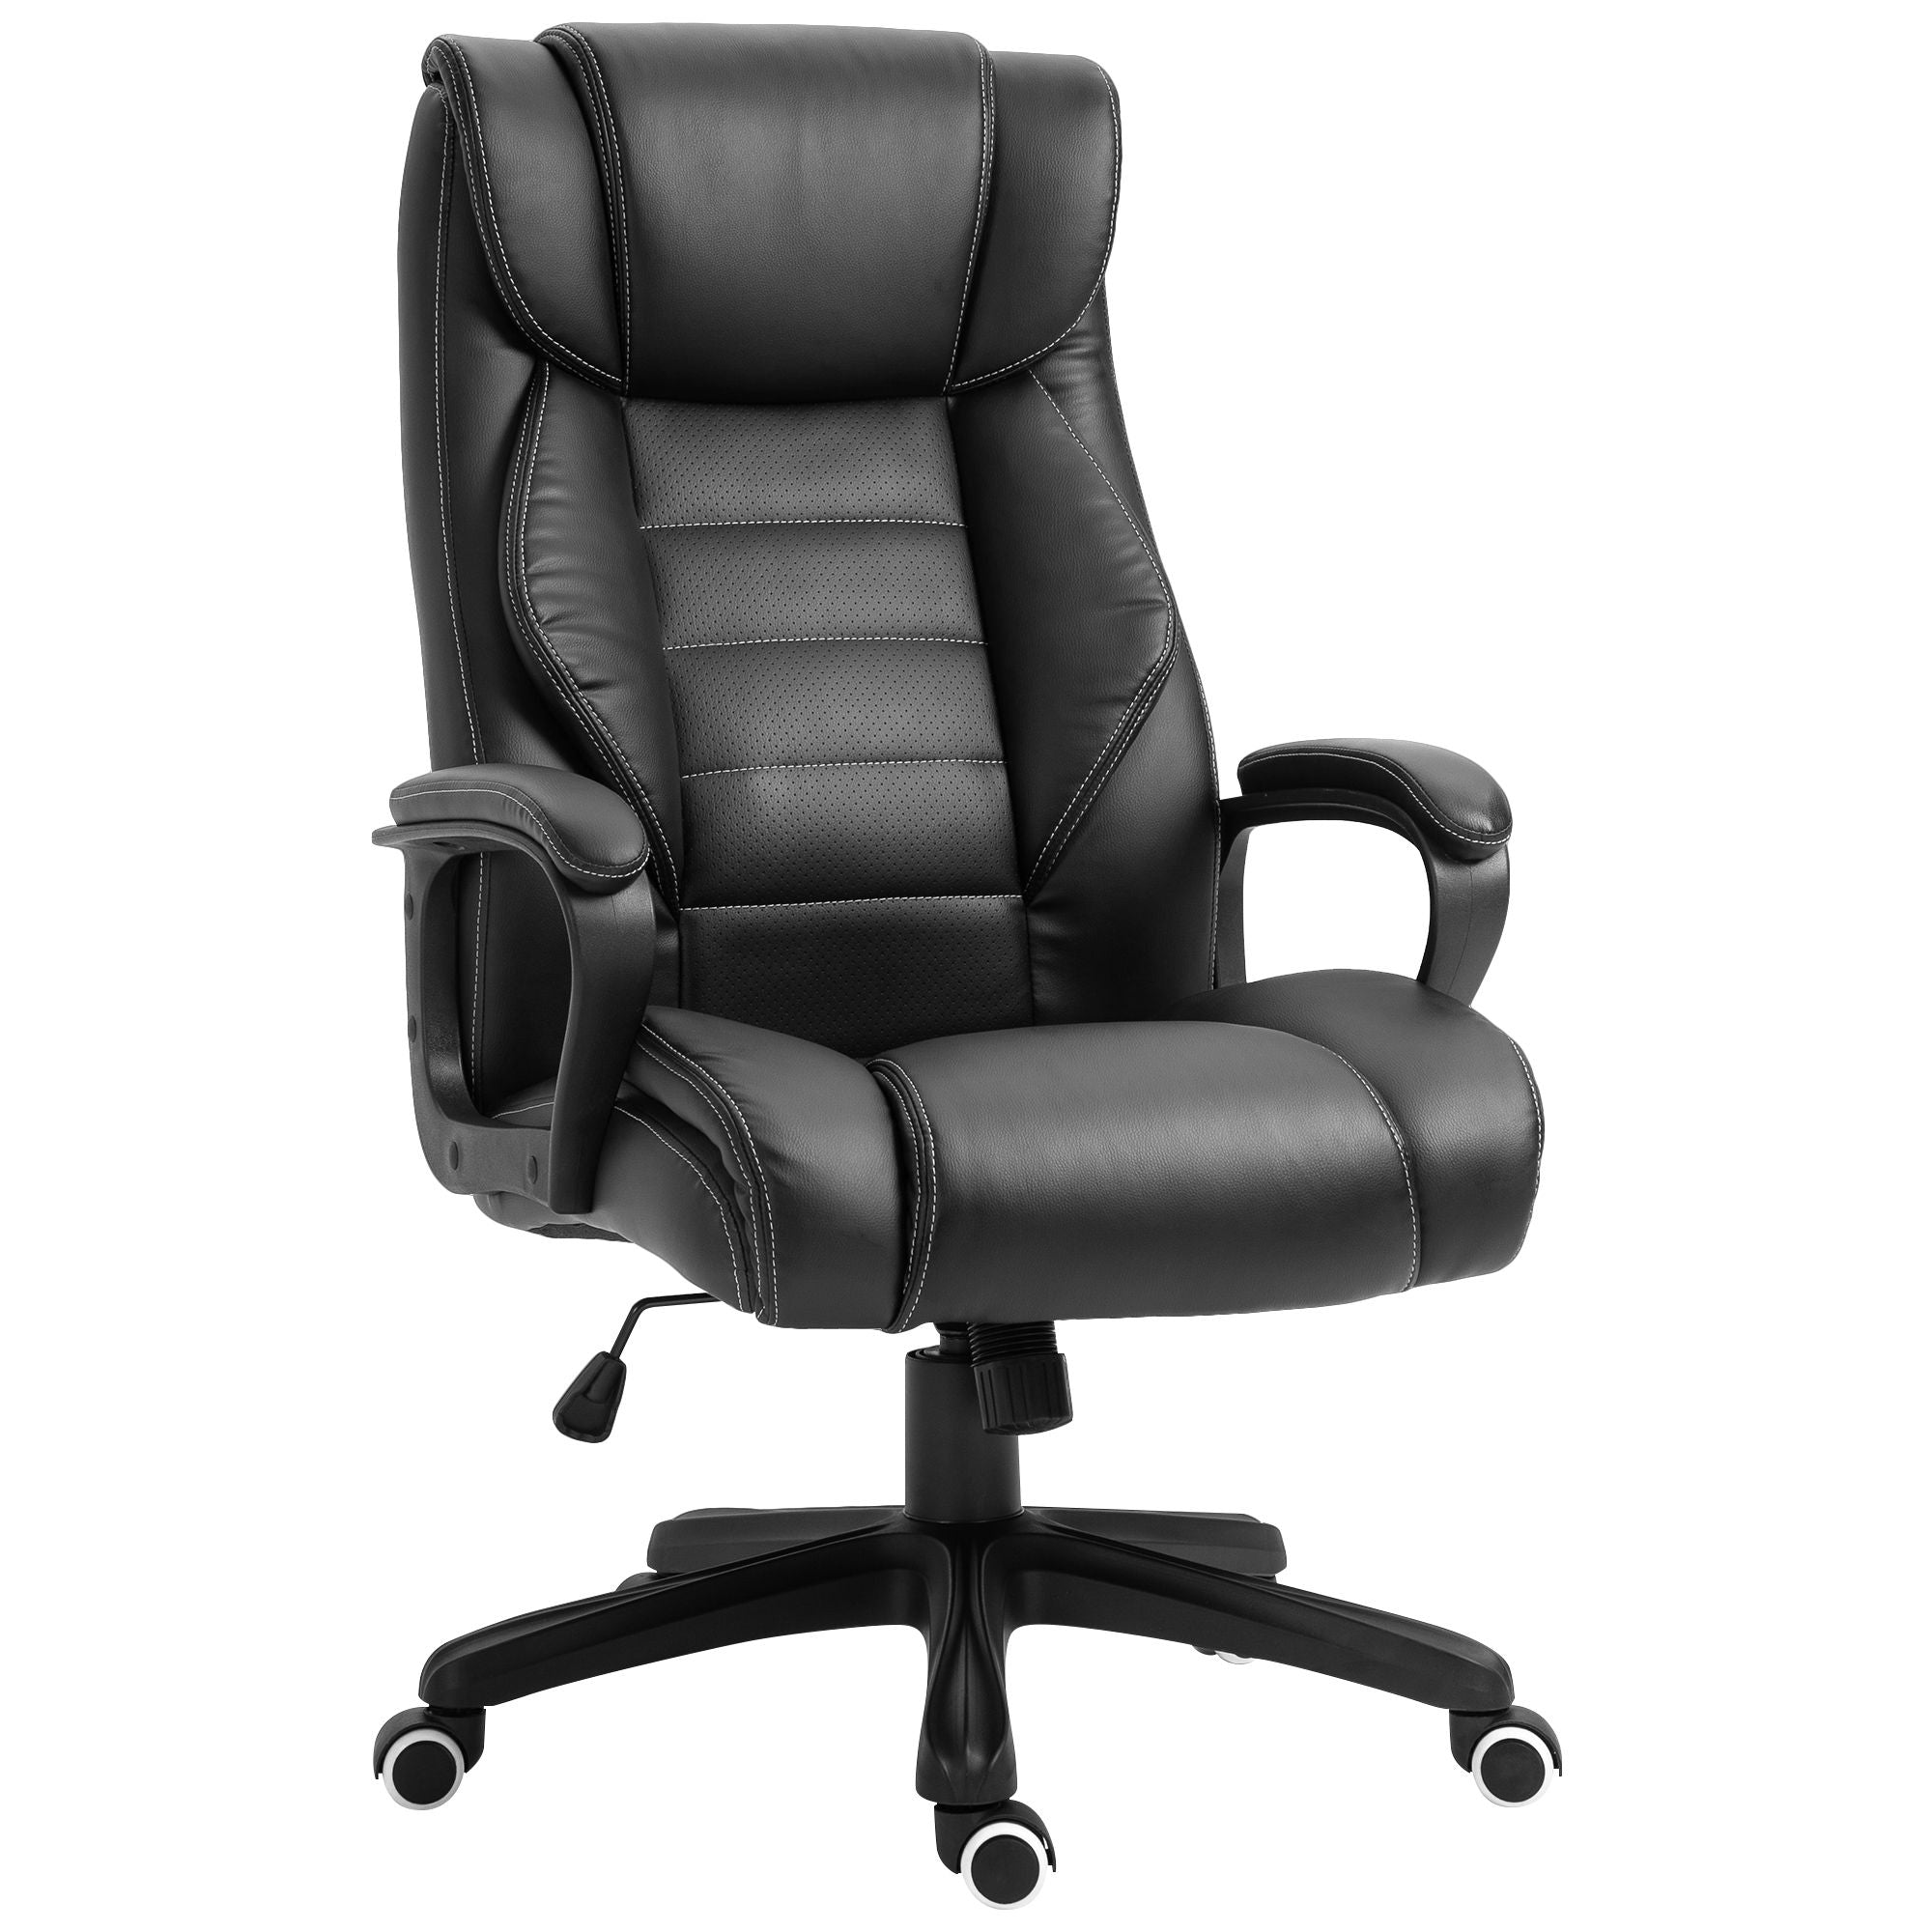 ProperAV Extra Ergonomic High Back Tilting Executive Office Chair with 6-Point Vibration Massage Function (Black)